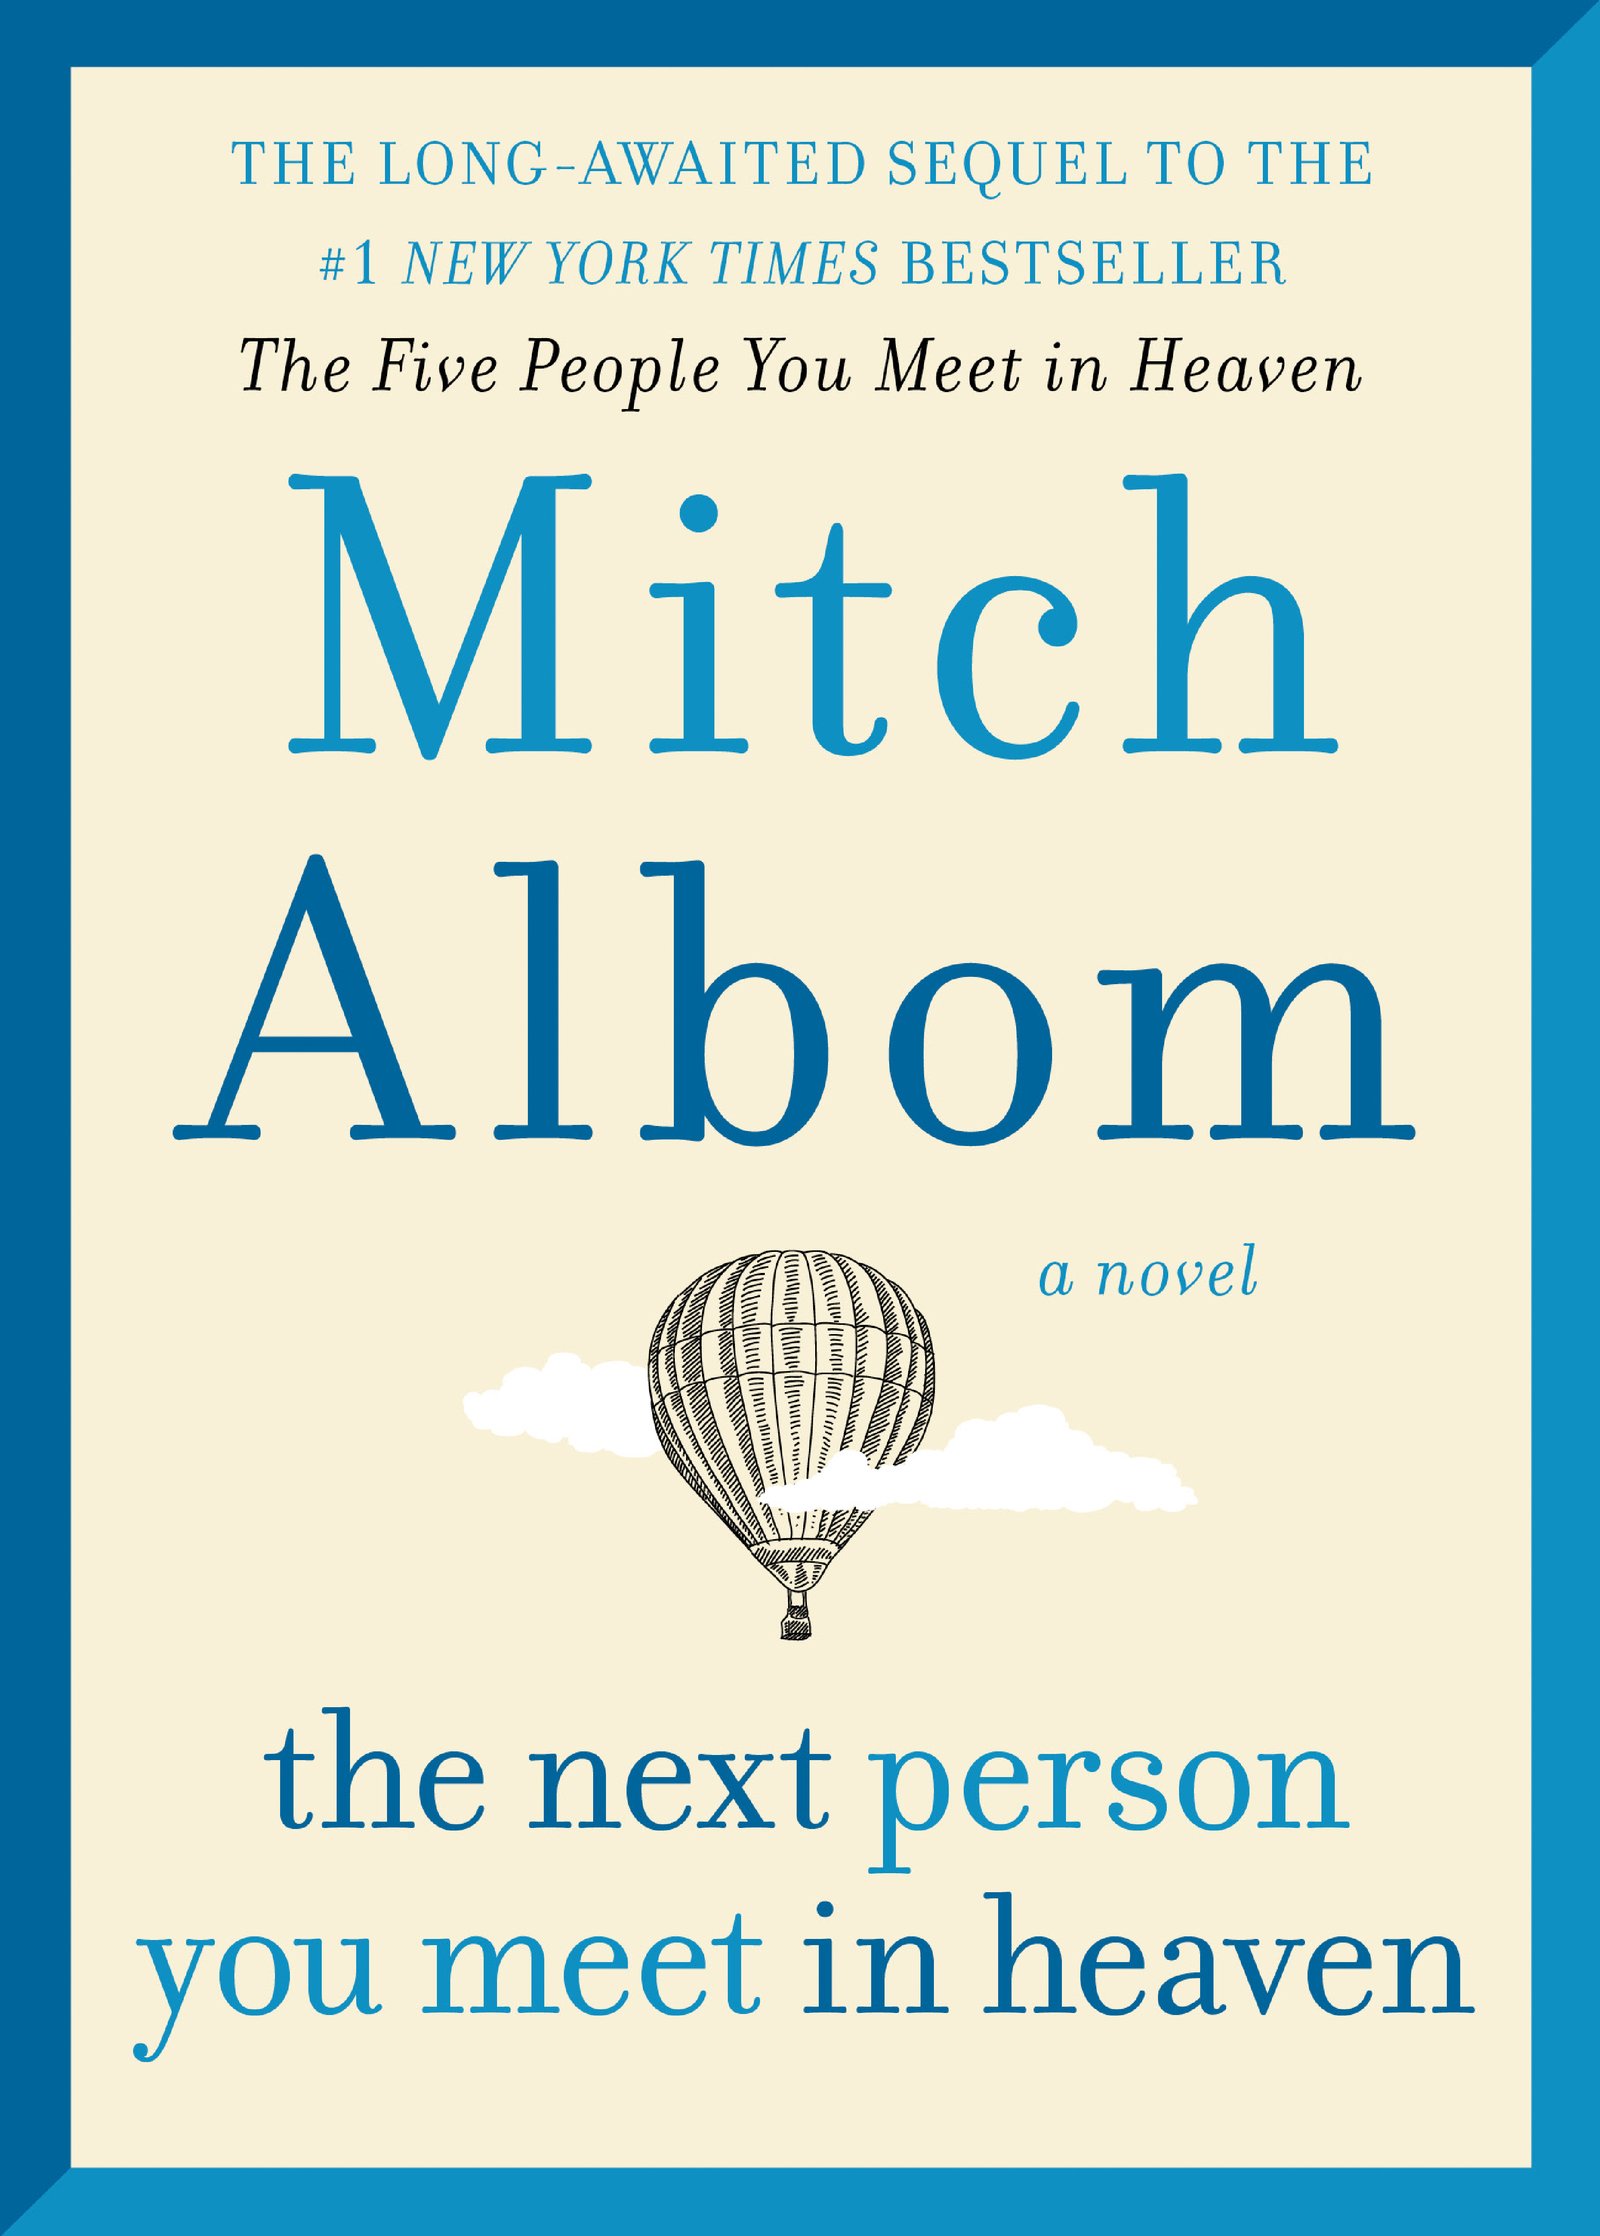 Mitch Albom to Speak and Sign Latest Book at MSU College of Arts